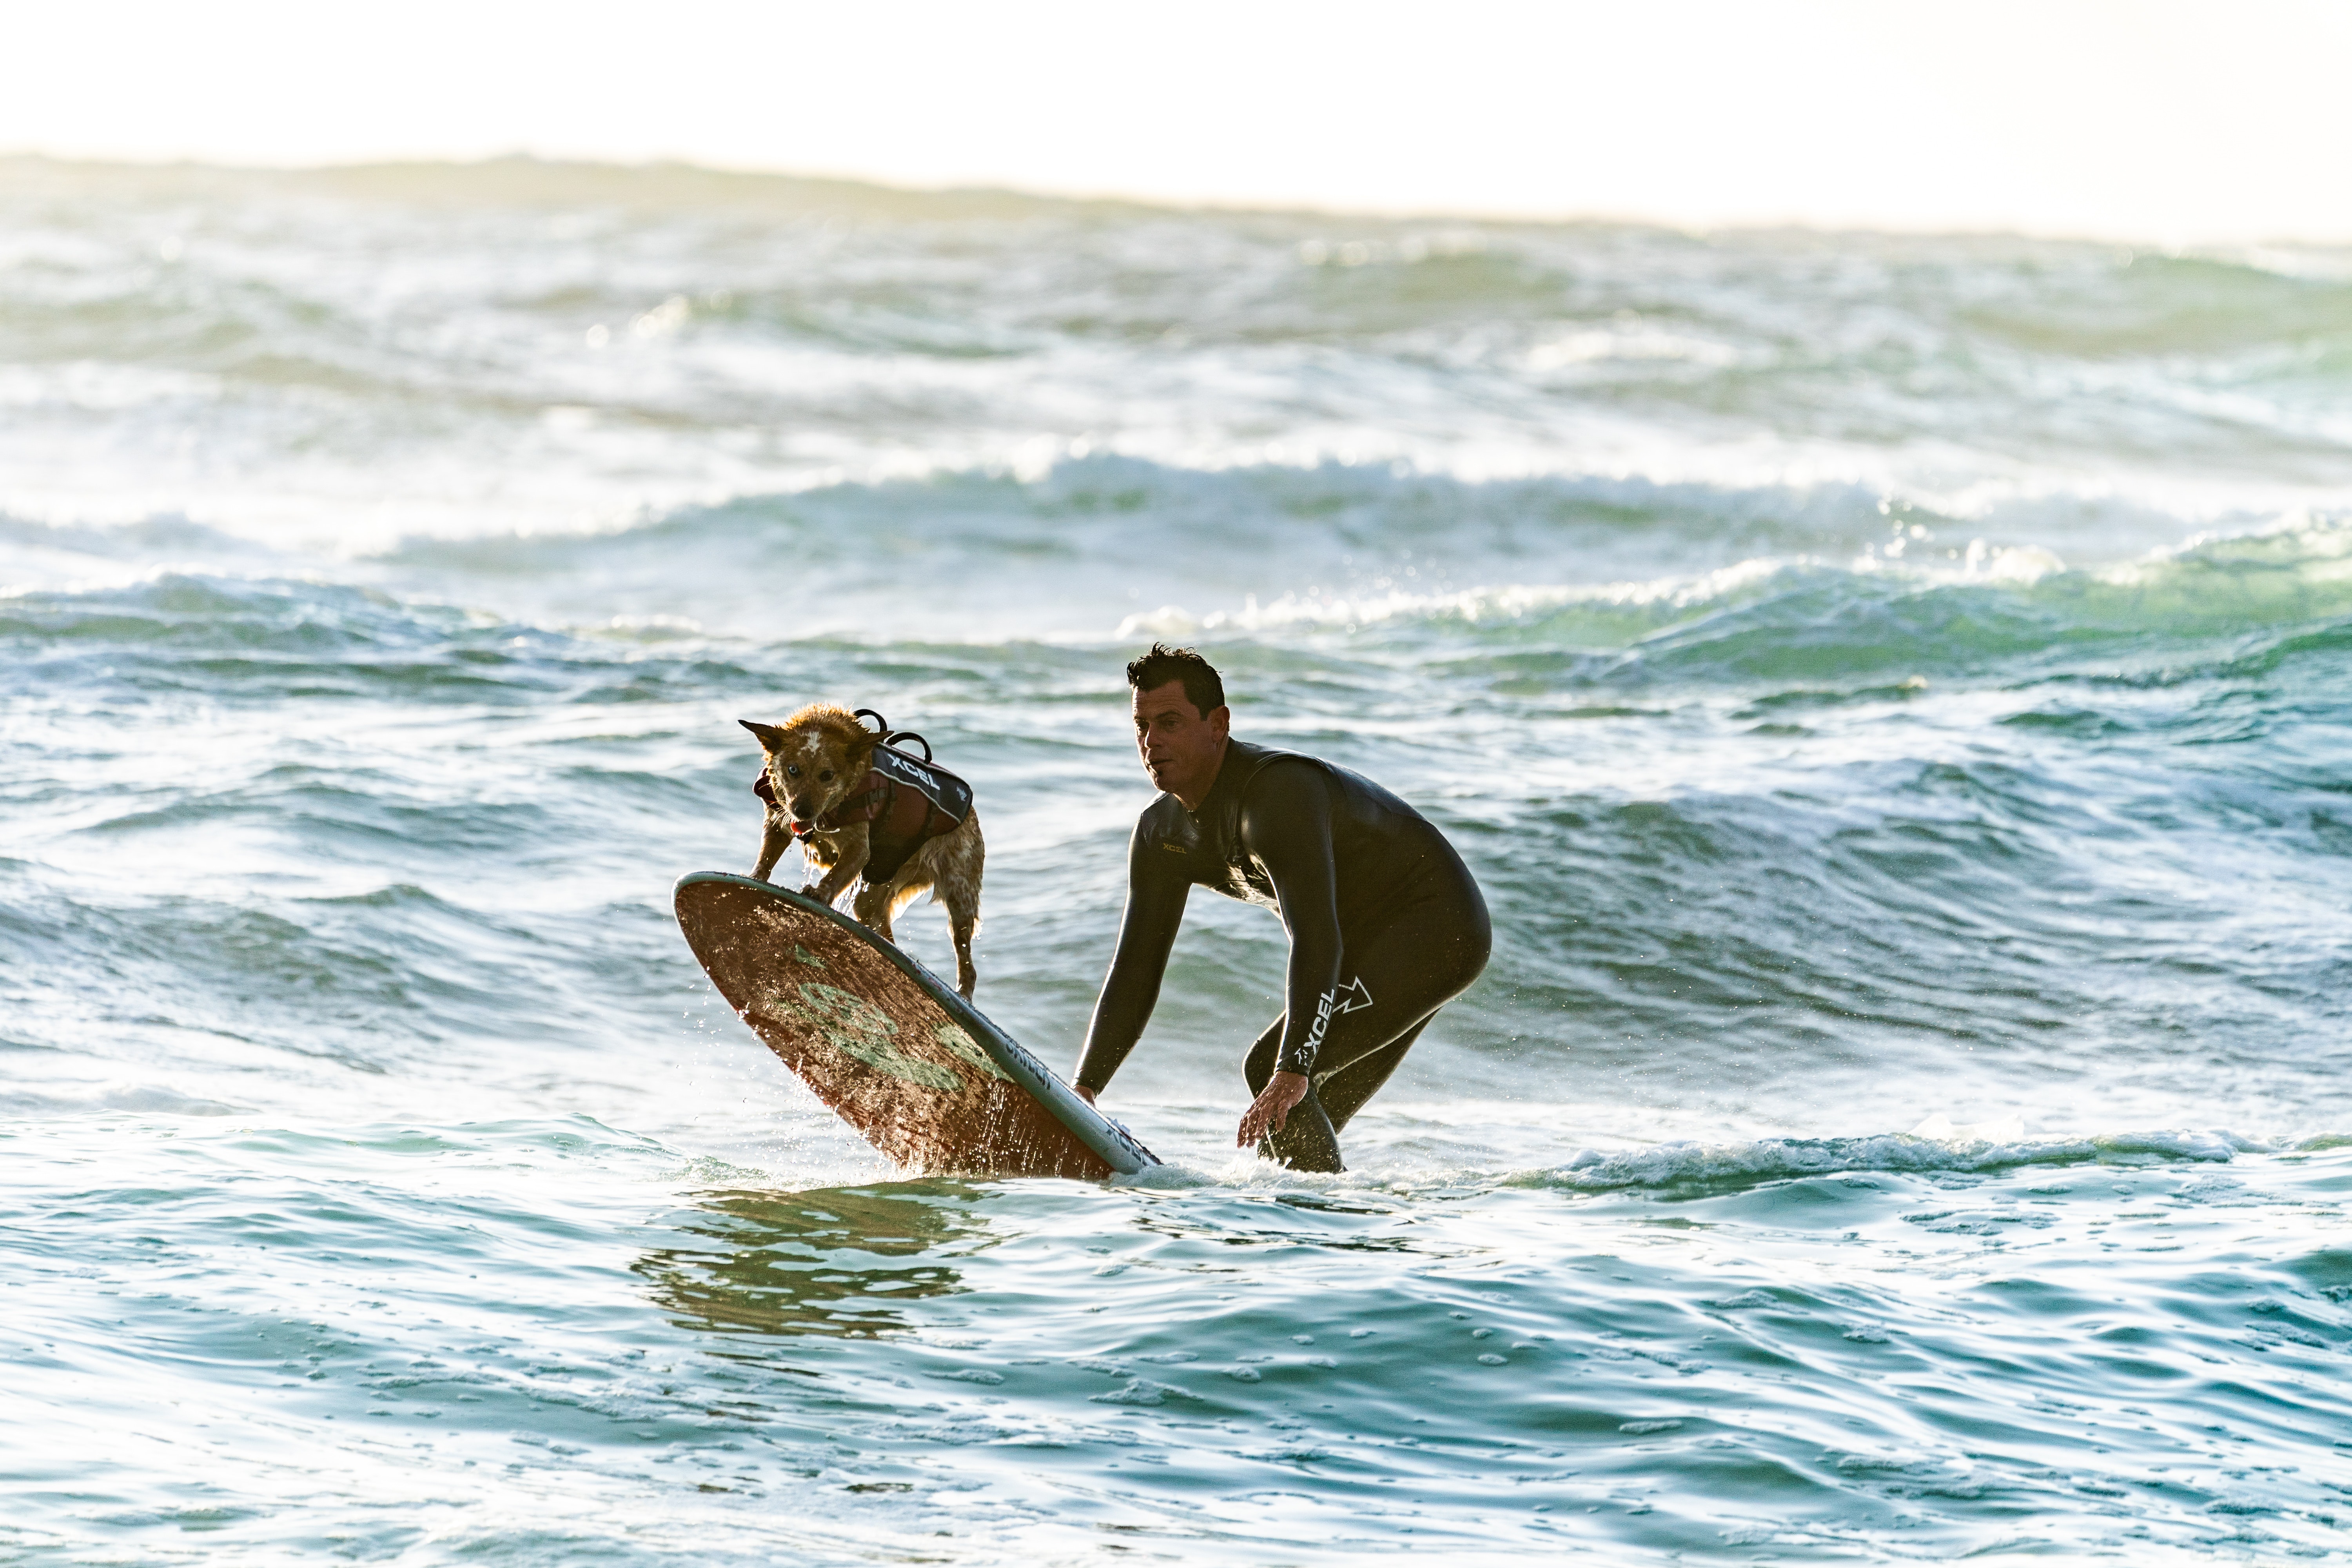 A surfer and his dog on a surfboard